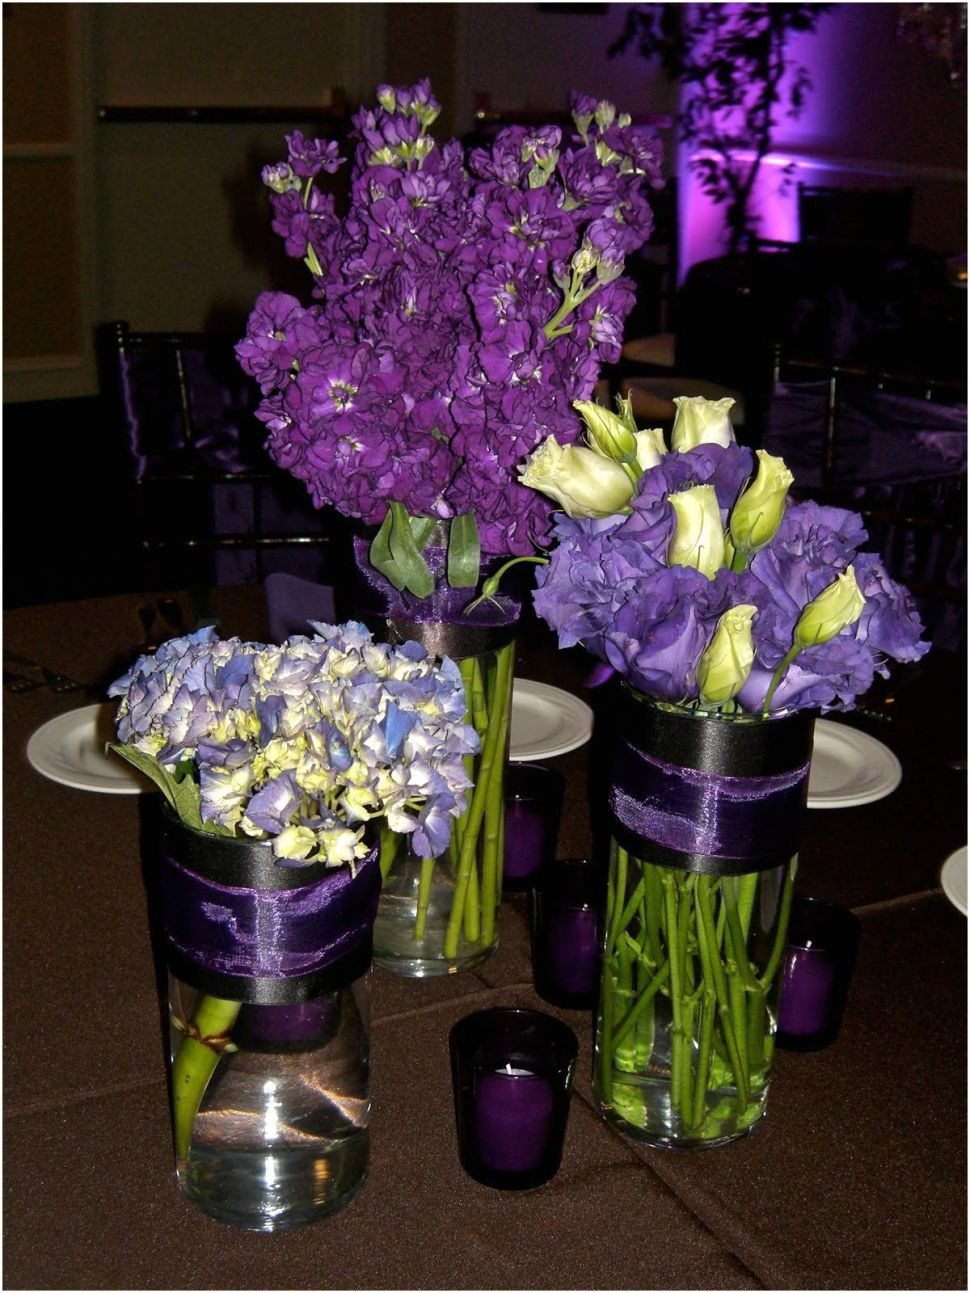 26 Recommended Jeep Flower Vase 2024 free download jeep flower vase of purple flower vase images wedding flowers near me lovely awesome for purple flower vase photos purple silk flowers stupendous dsc 1329h vases purple previ 0d floor of